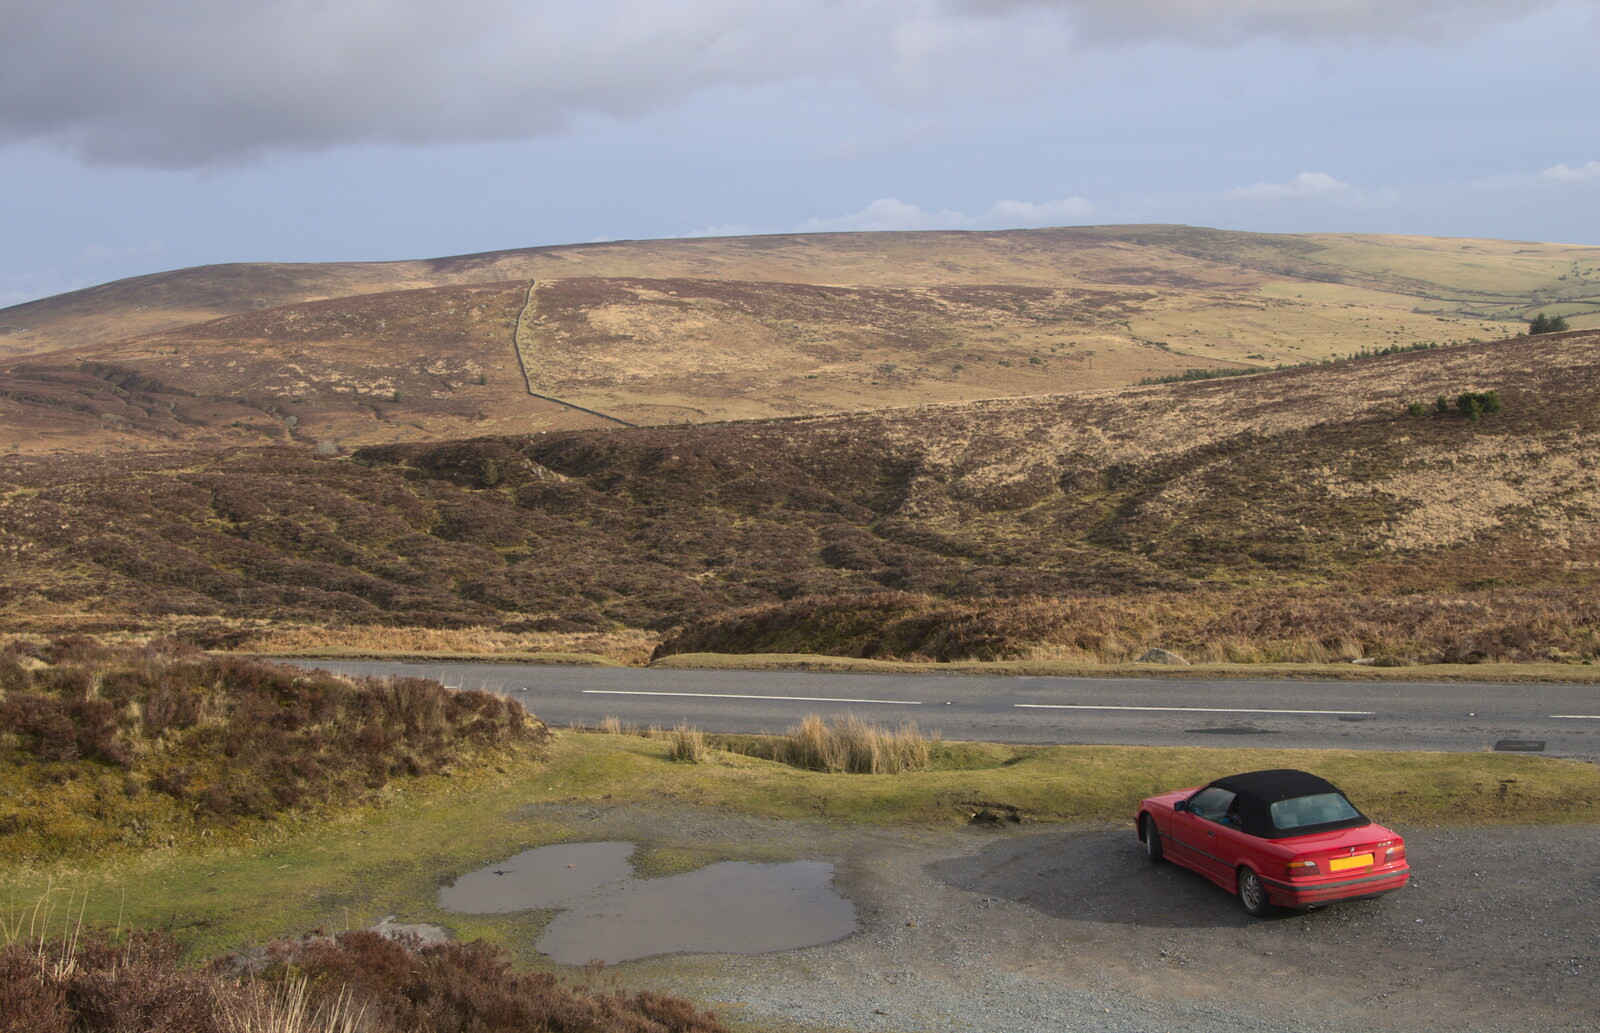 The car looks at the scenery from A Trip to Grandma J's, Spreyton, Devon - 18th February 2015